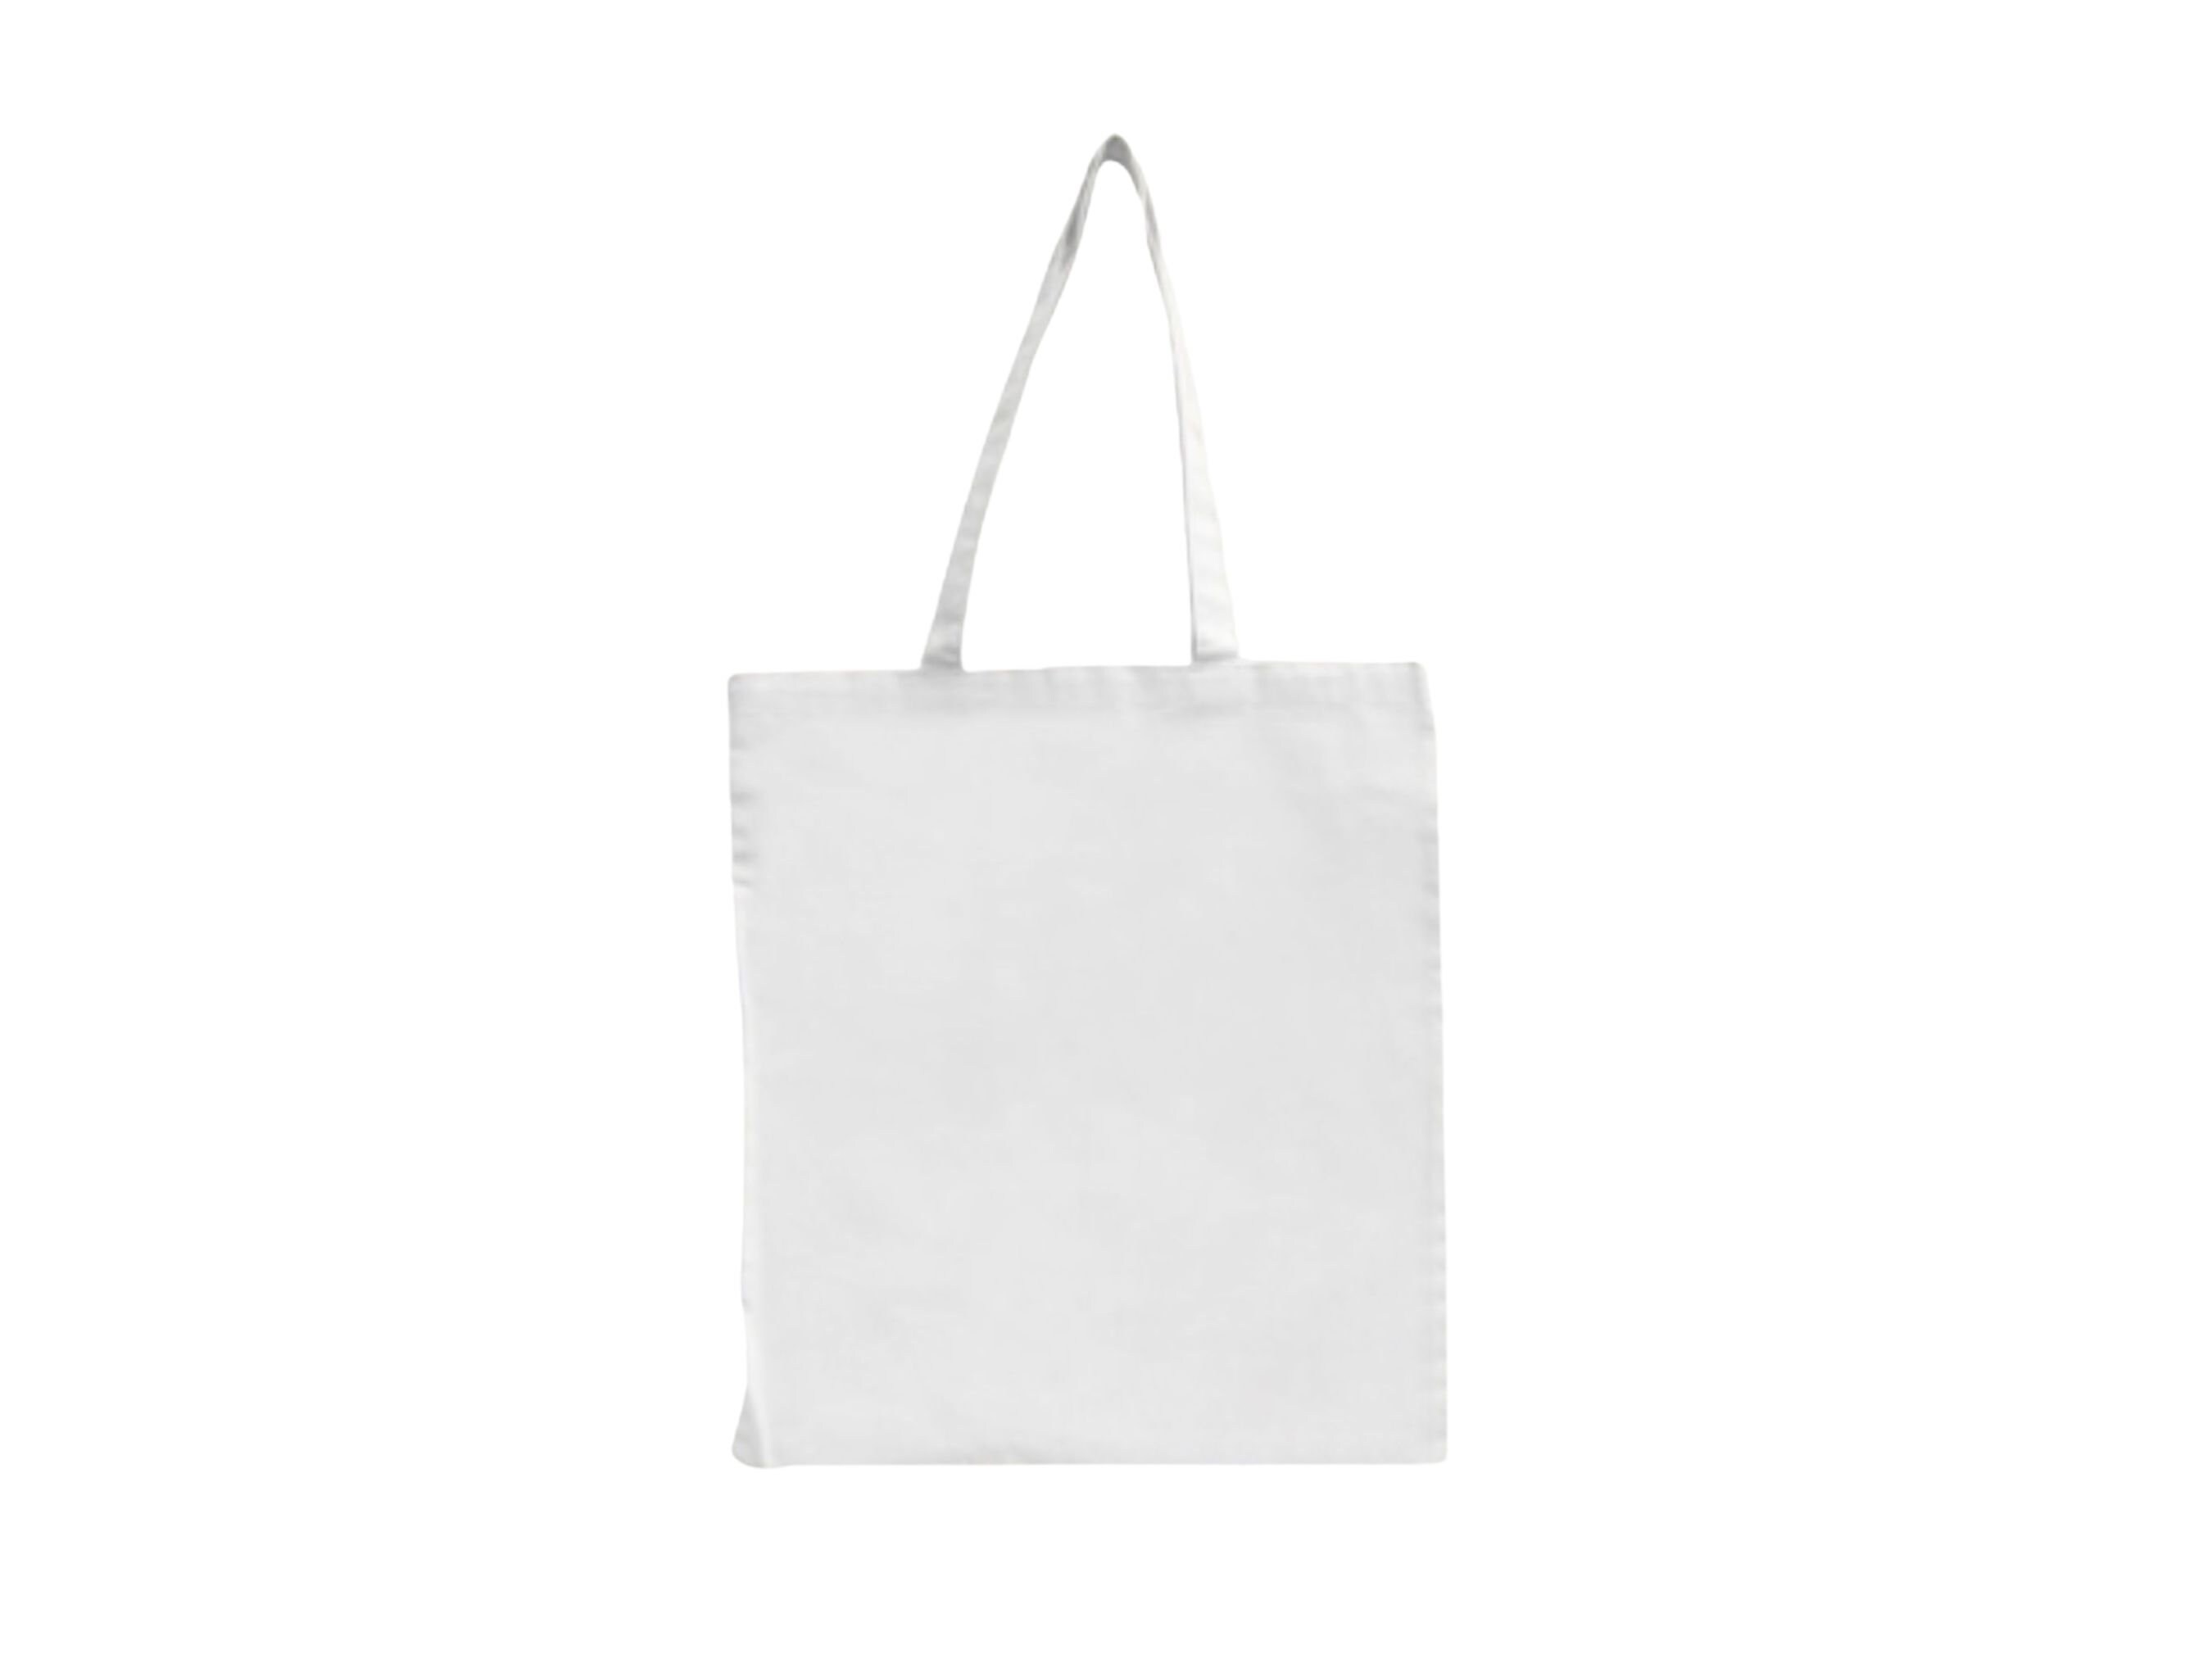 HOMEMAXS 10Pcs Sublimation Tote Bags Canvas Shopping Bags Blank Tote Bags  Grocery Pouch 